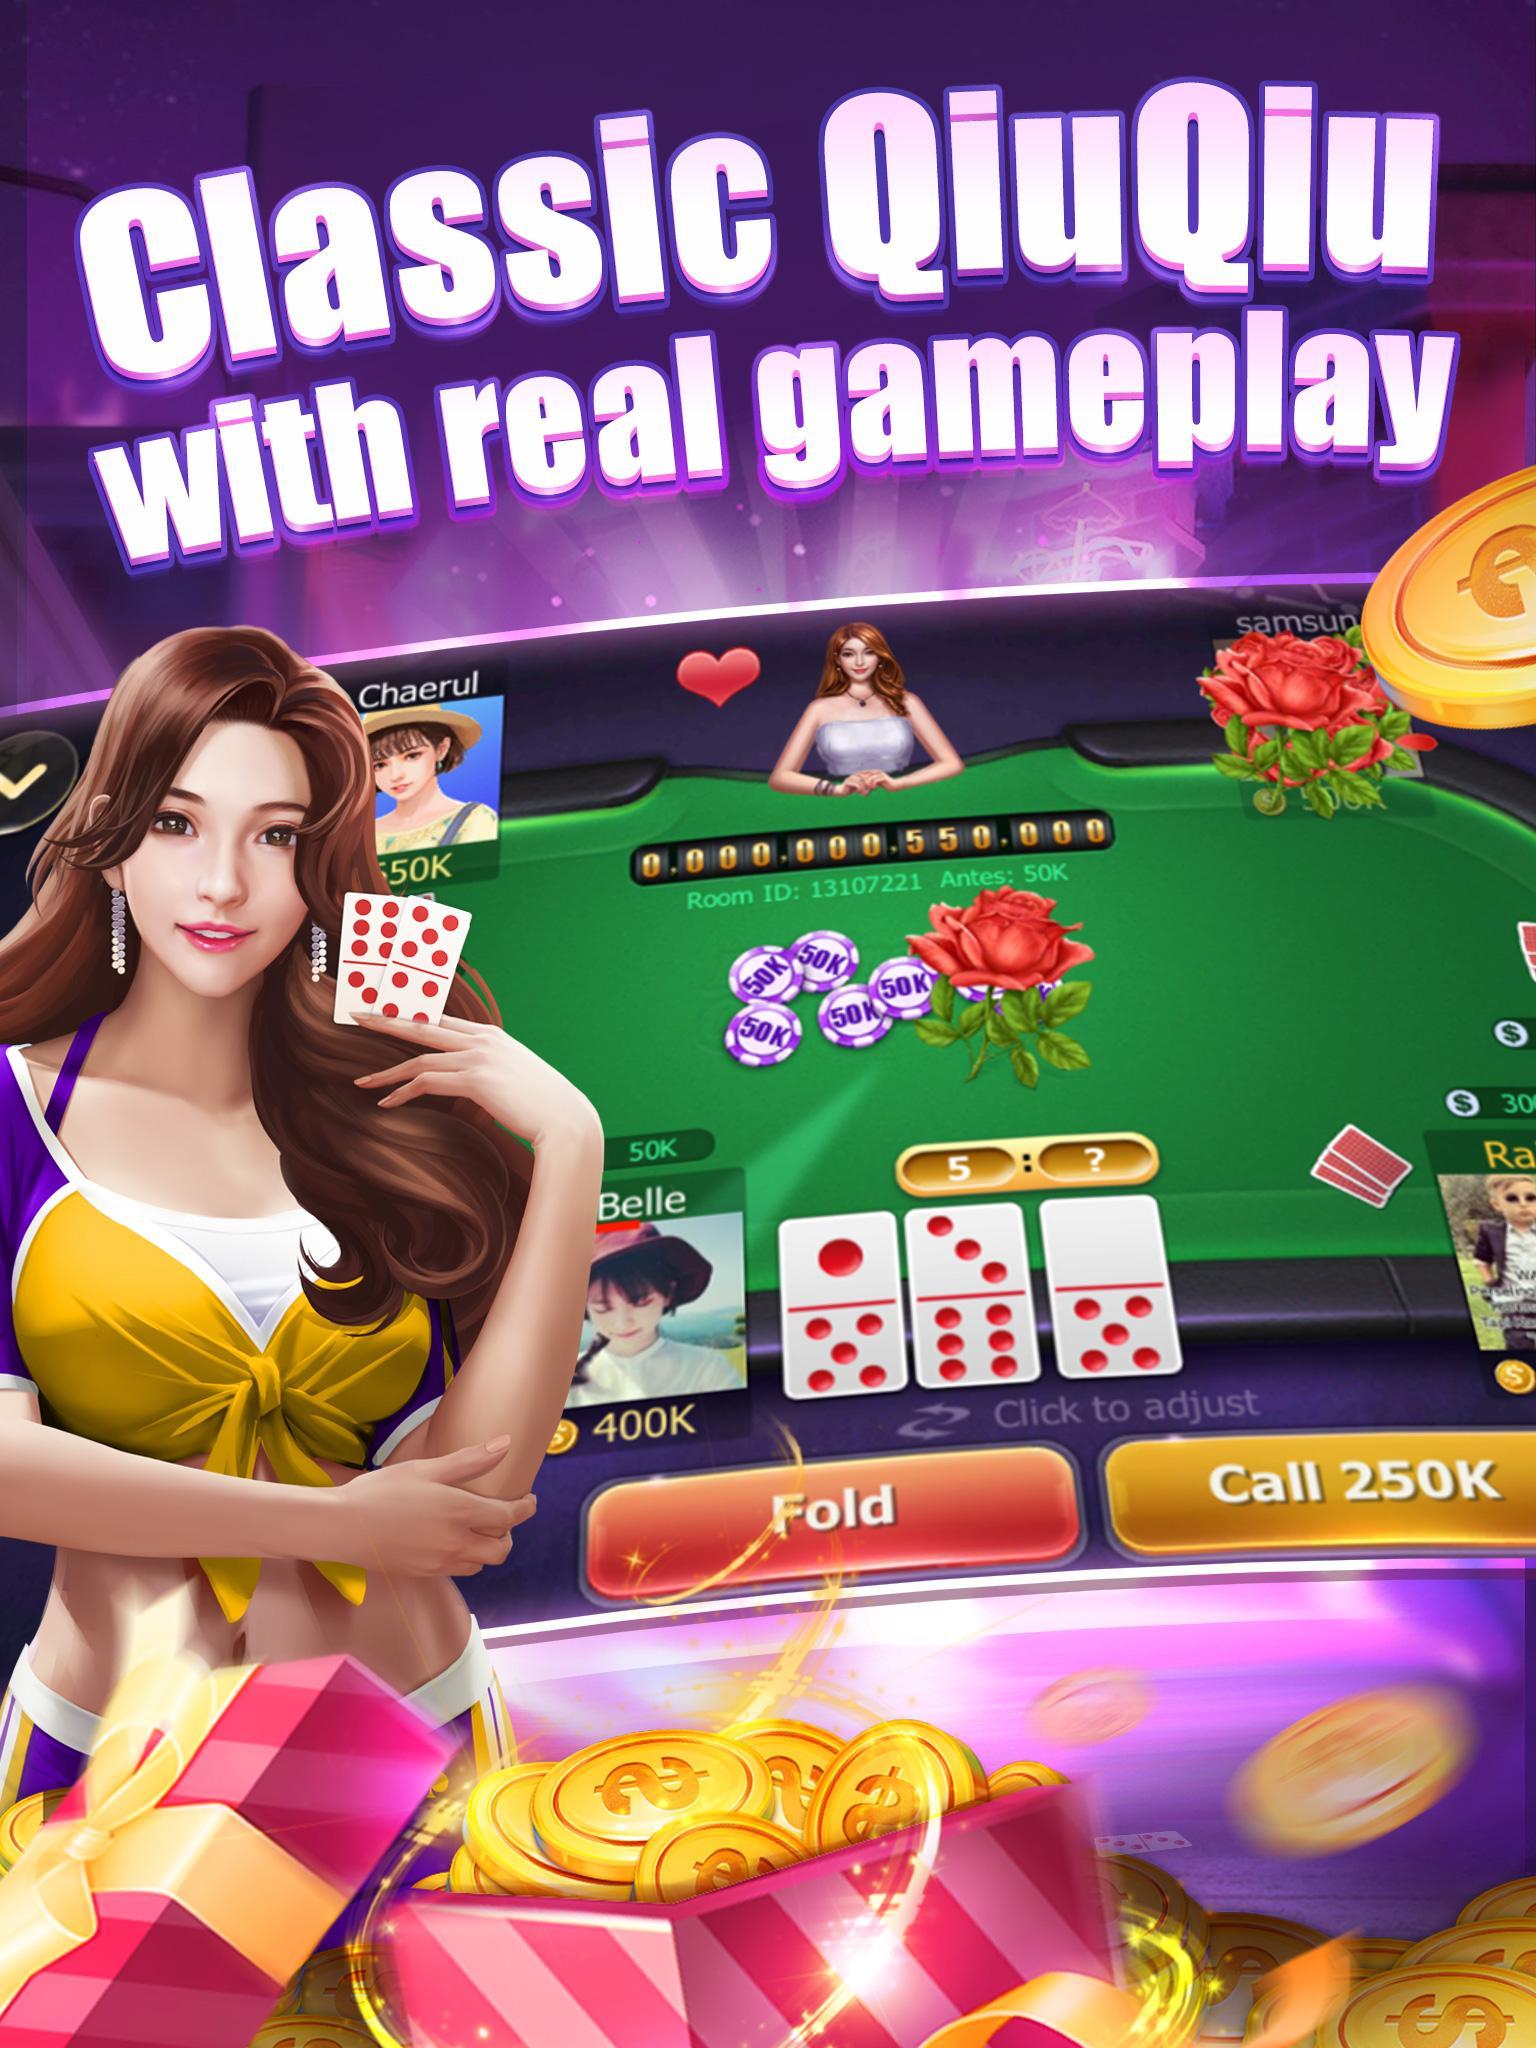 Read more about the article Download Game Domino Qiu Qiu Online Untuk Android, Gaple Capsa Susun: QiuQiu(99)/Texas Remi Online<div class="yasr-vv-stars-title-container"><div class='yasr-stars-title yasr-rater-stars'
                          id='yasr-visitor-votes-readonly-rater-b897d043a6336'
                          data-rating='0'
                          data-rater-starsize='16'
                          data-rater-postid='2298'
                          data-rater-readonly='true'
                          data-readonly-attribute='true'
                      ></div><span class='yasr-stars-title-average'>0 (0)</span></div>